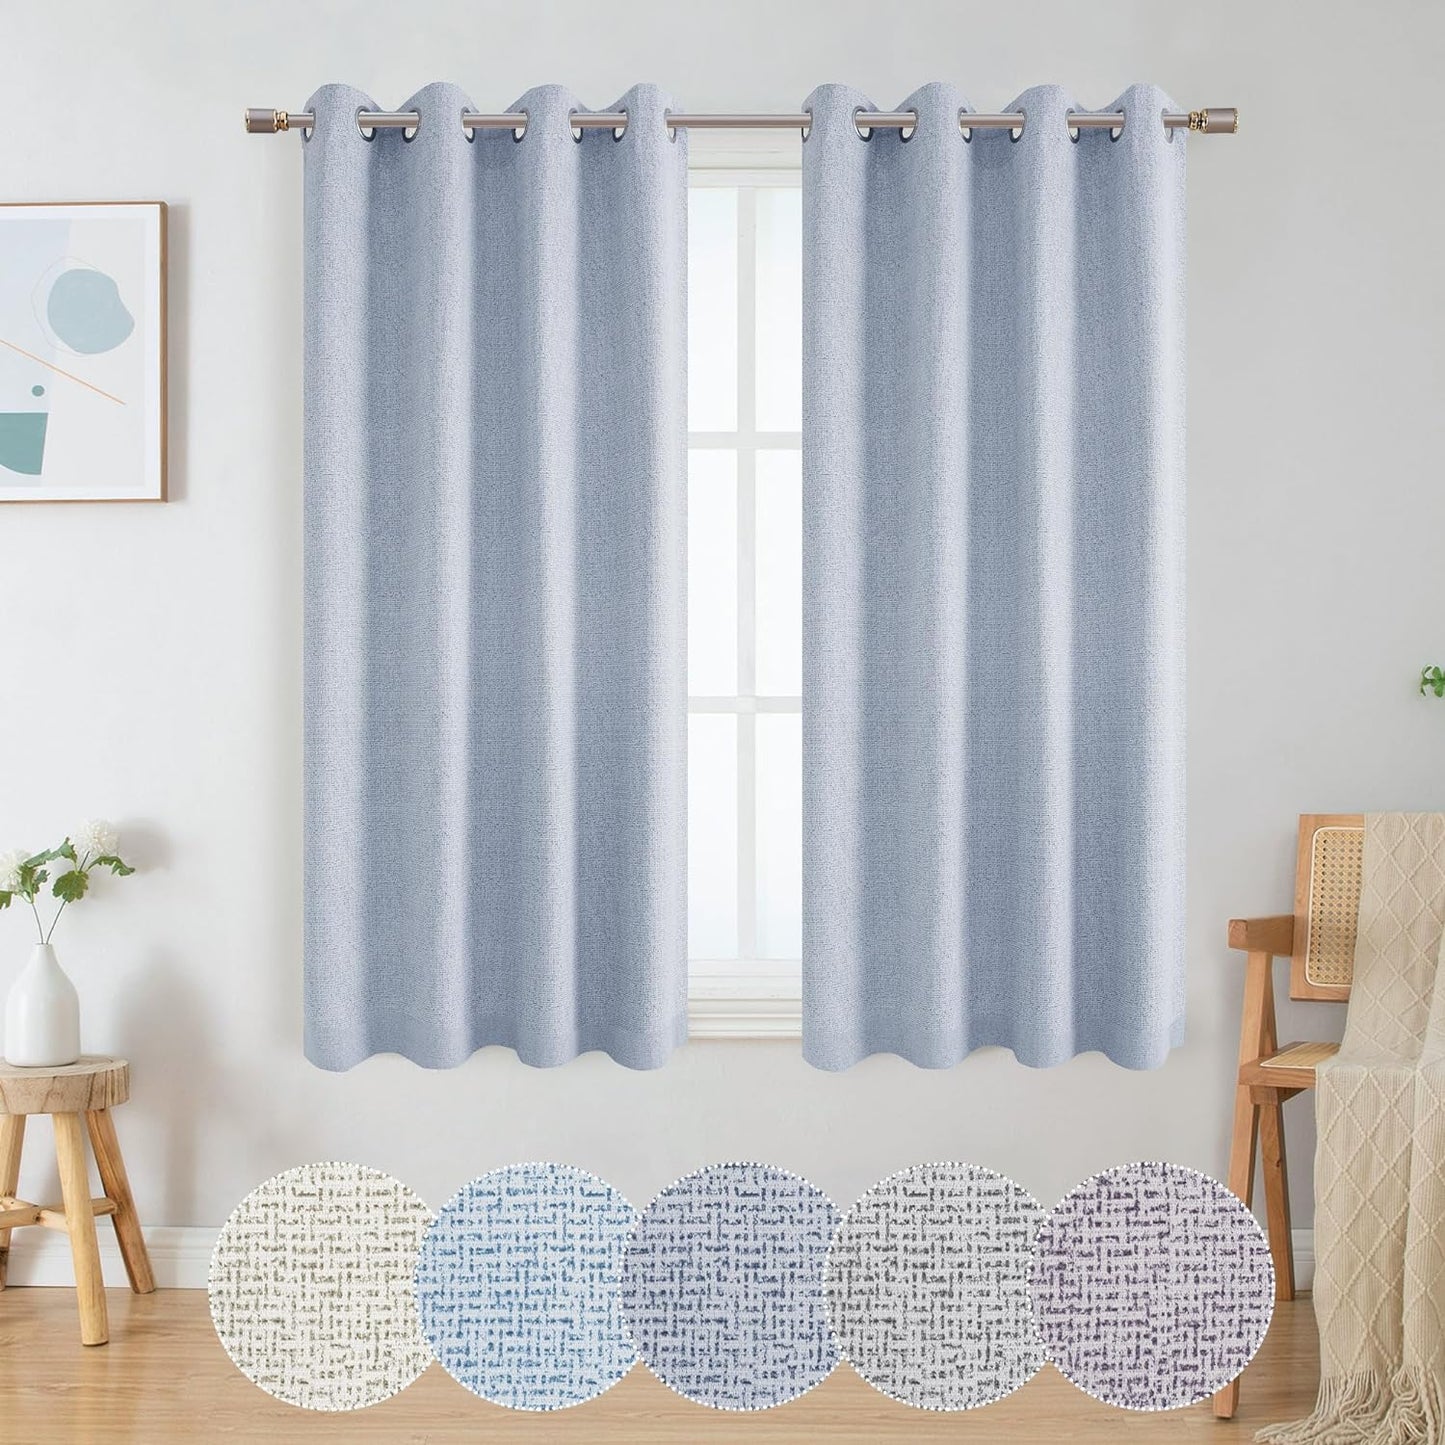 OWENIE Luke Black Out Curtains 63 Inch Long 2 Panels for Bedroom, Geometric Printed Completely Blackout Room Darkening Curtains, Grommet Thermal Insulated Living Room Curtain, 2 PCS, Each 42Wx63L Inch  OWENIE Light Blue 42"W X 54"L | 2 Pcs 